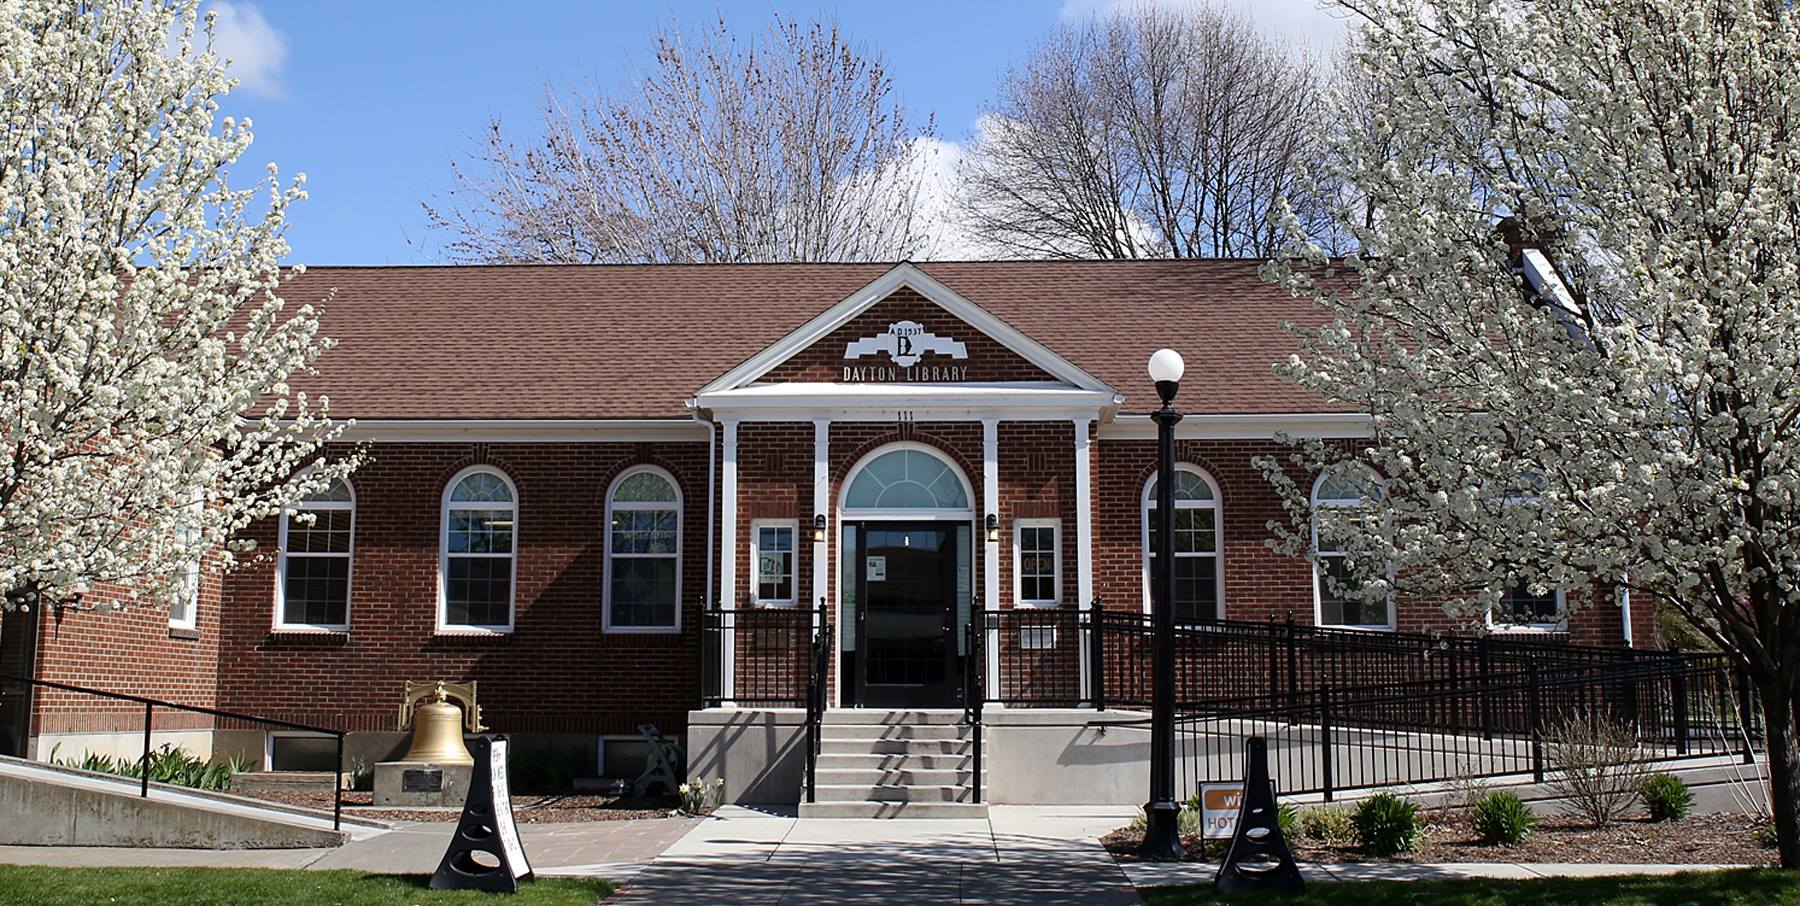 The picture shows a brick library building.